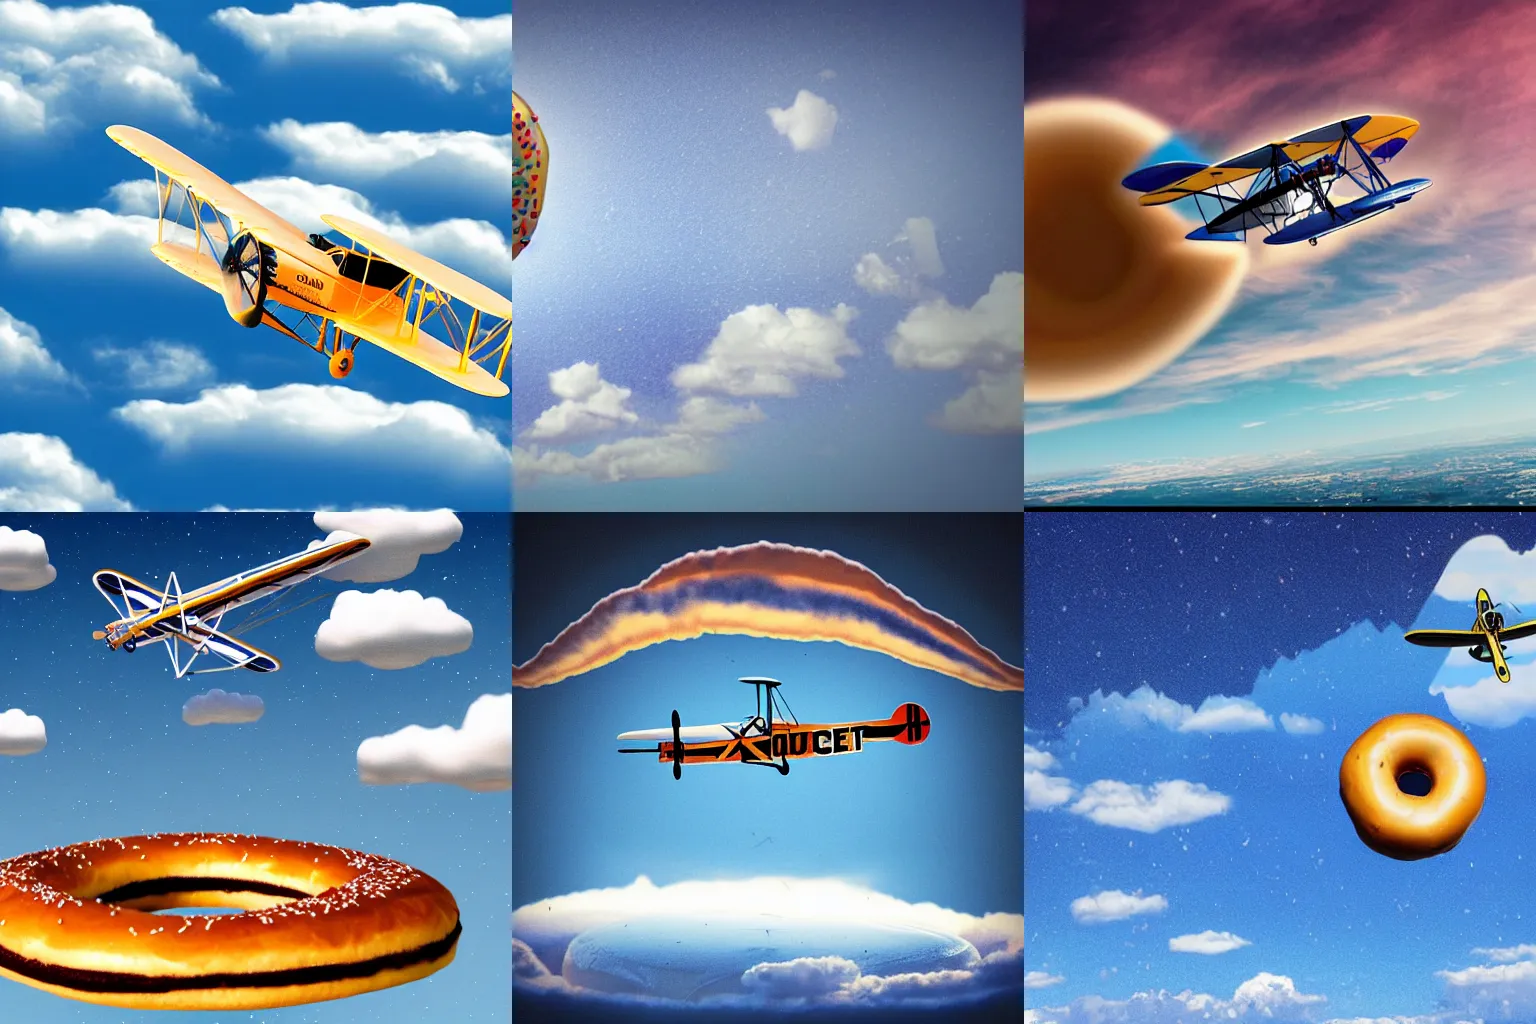 Prompt: photoshop image of biplane flying through giant donuts in the sky surreal